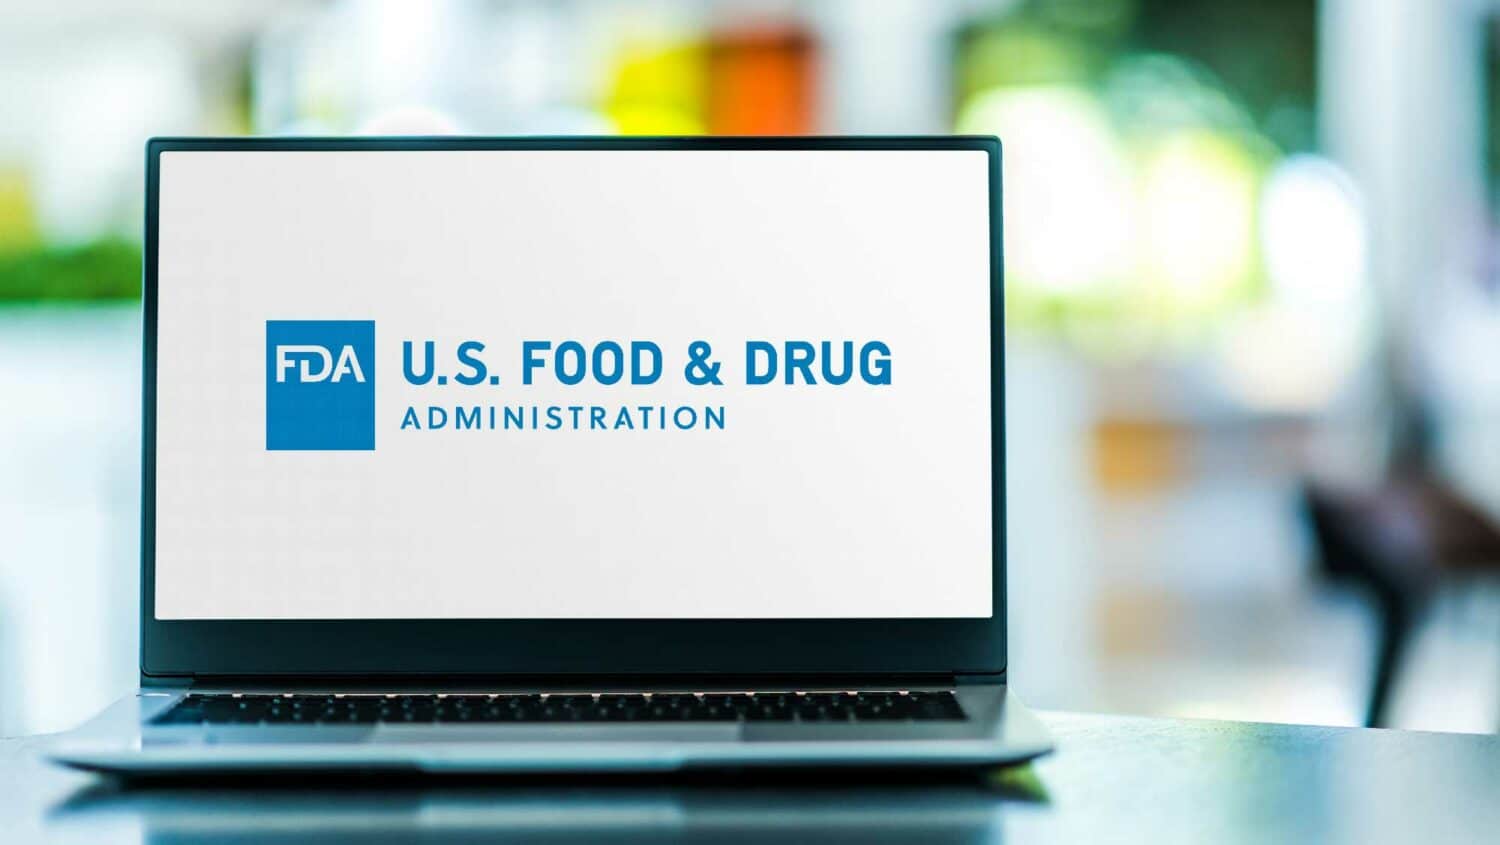 What’s Coming Down the Pike for Foods and Cosmetics, you ask? FDA Showcases New Regulation Portal for Food + Cosmetics Program